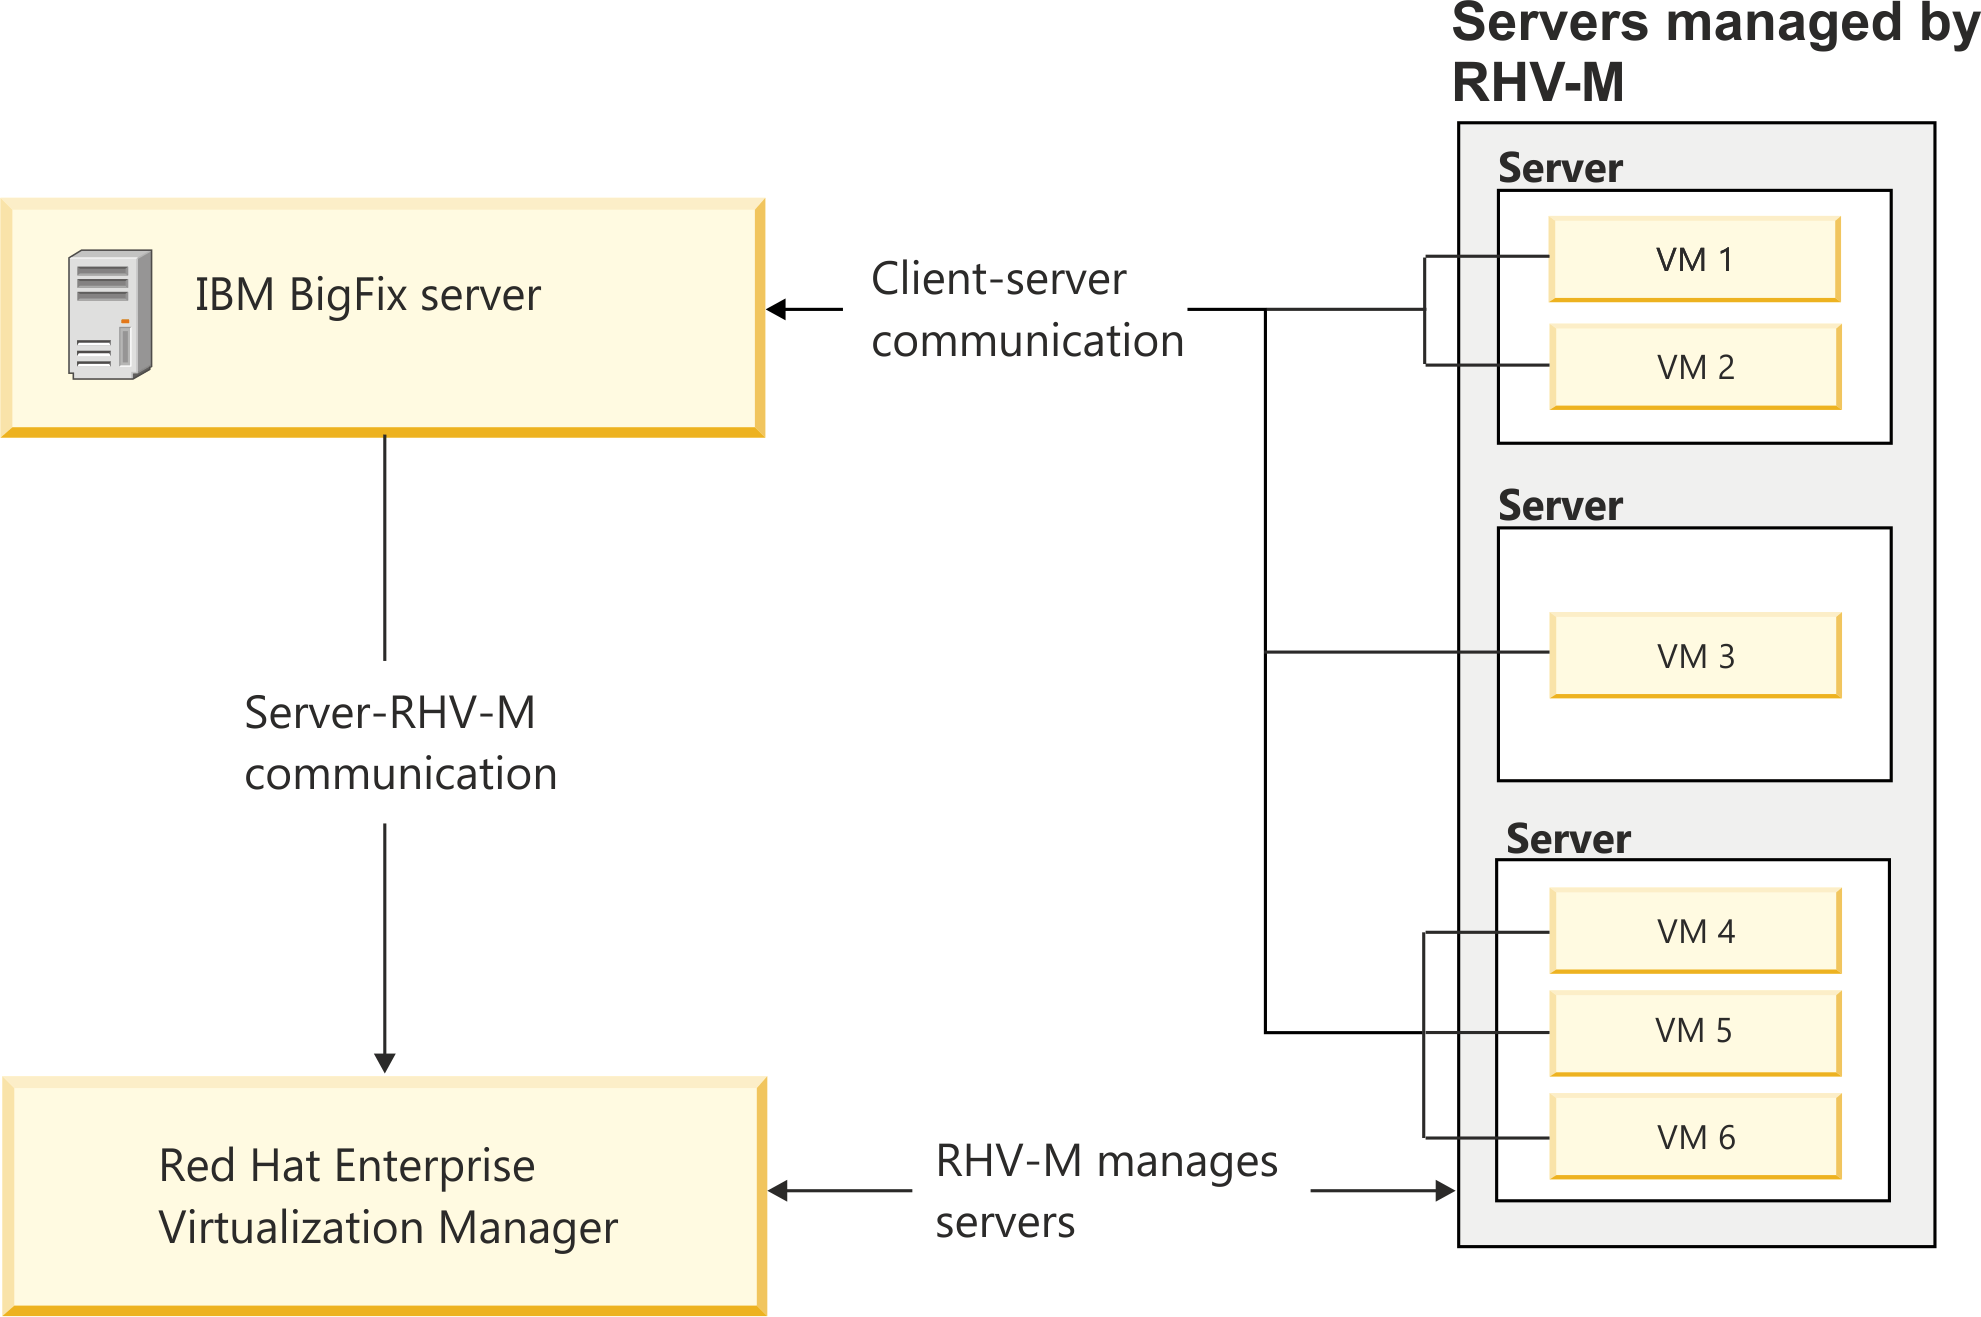 Diagram showing the communication between the server and RHV-M